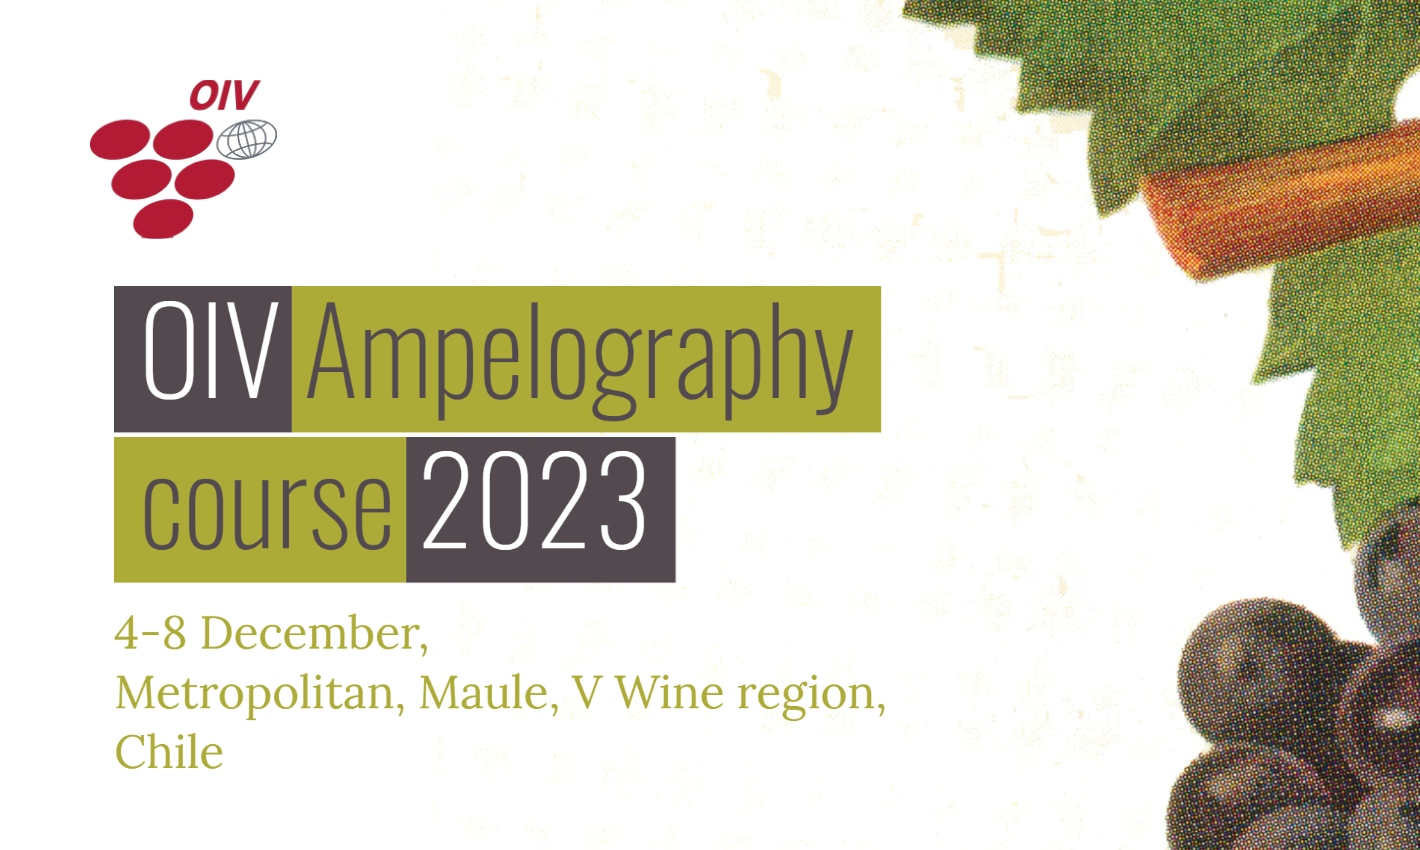 2023 OIV Ampelography course in Chile: Applications are open